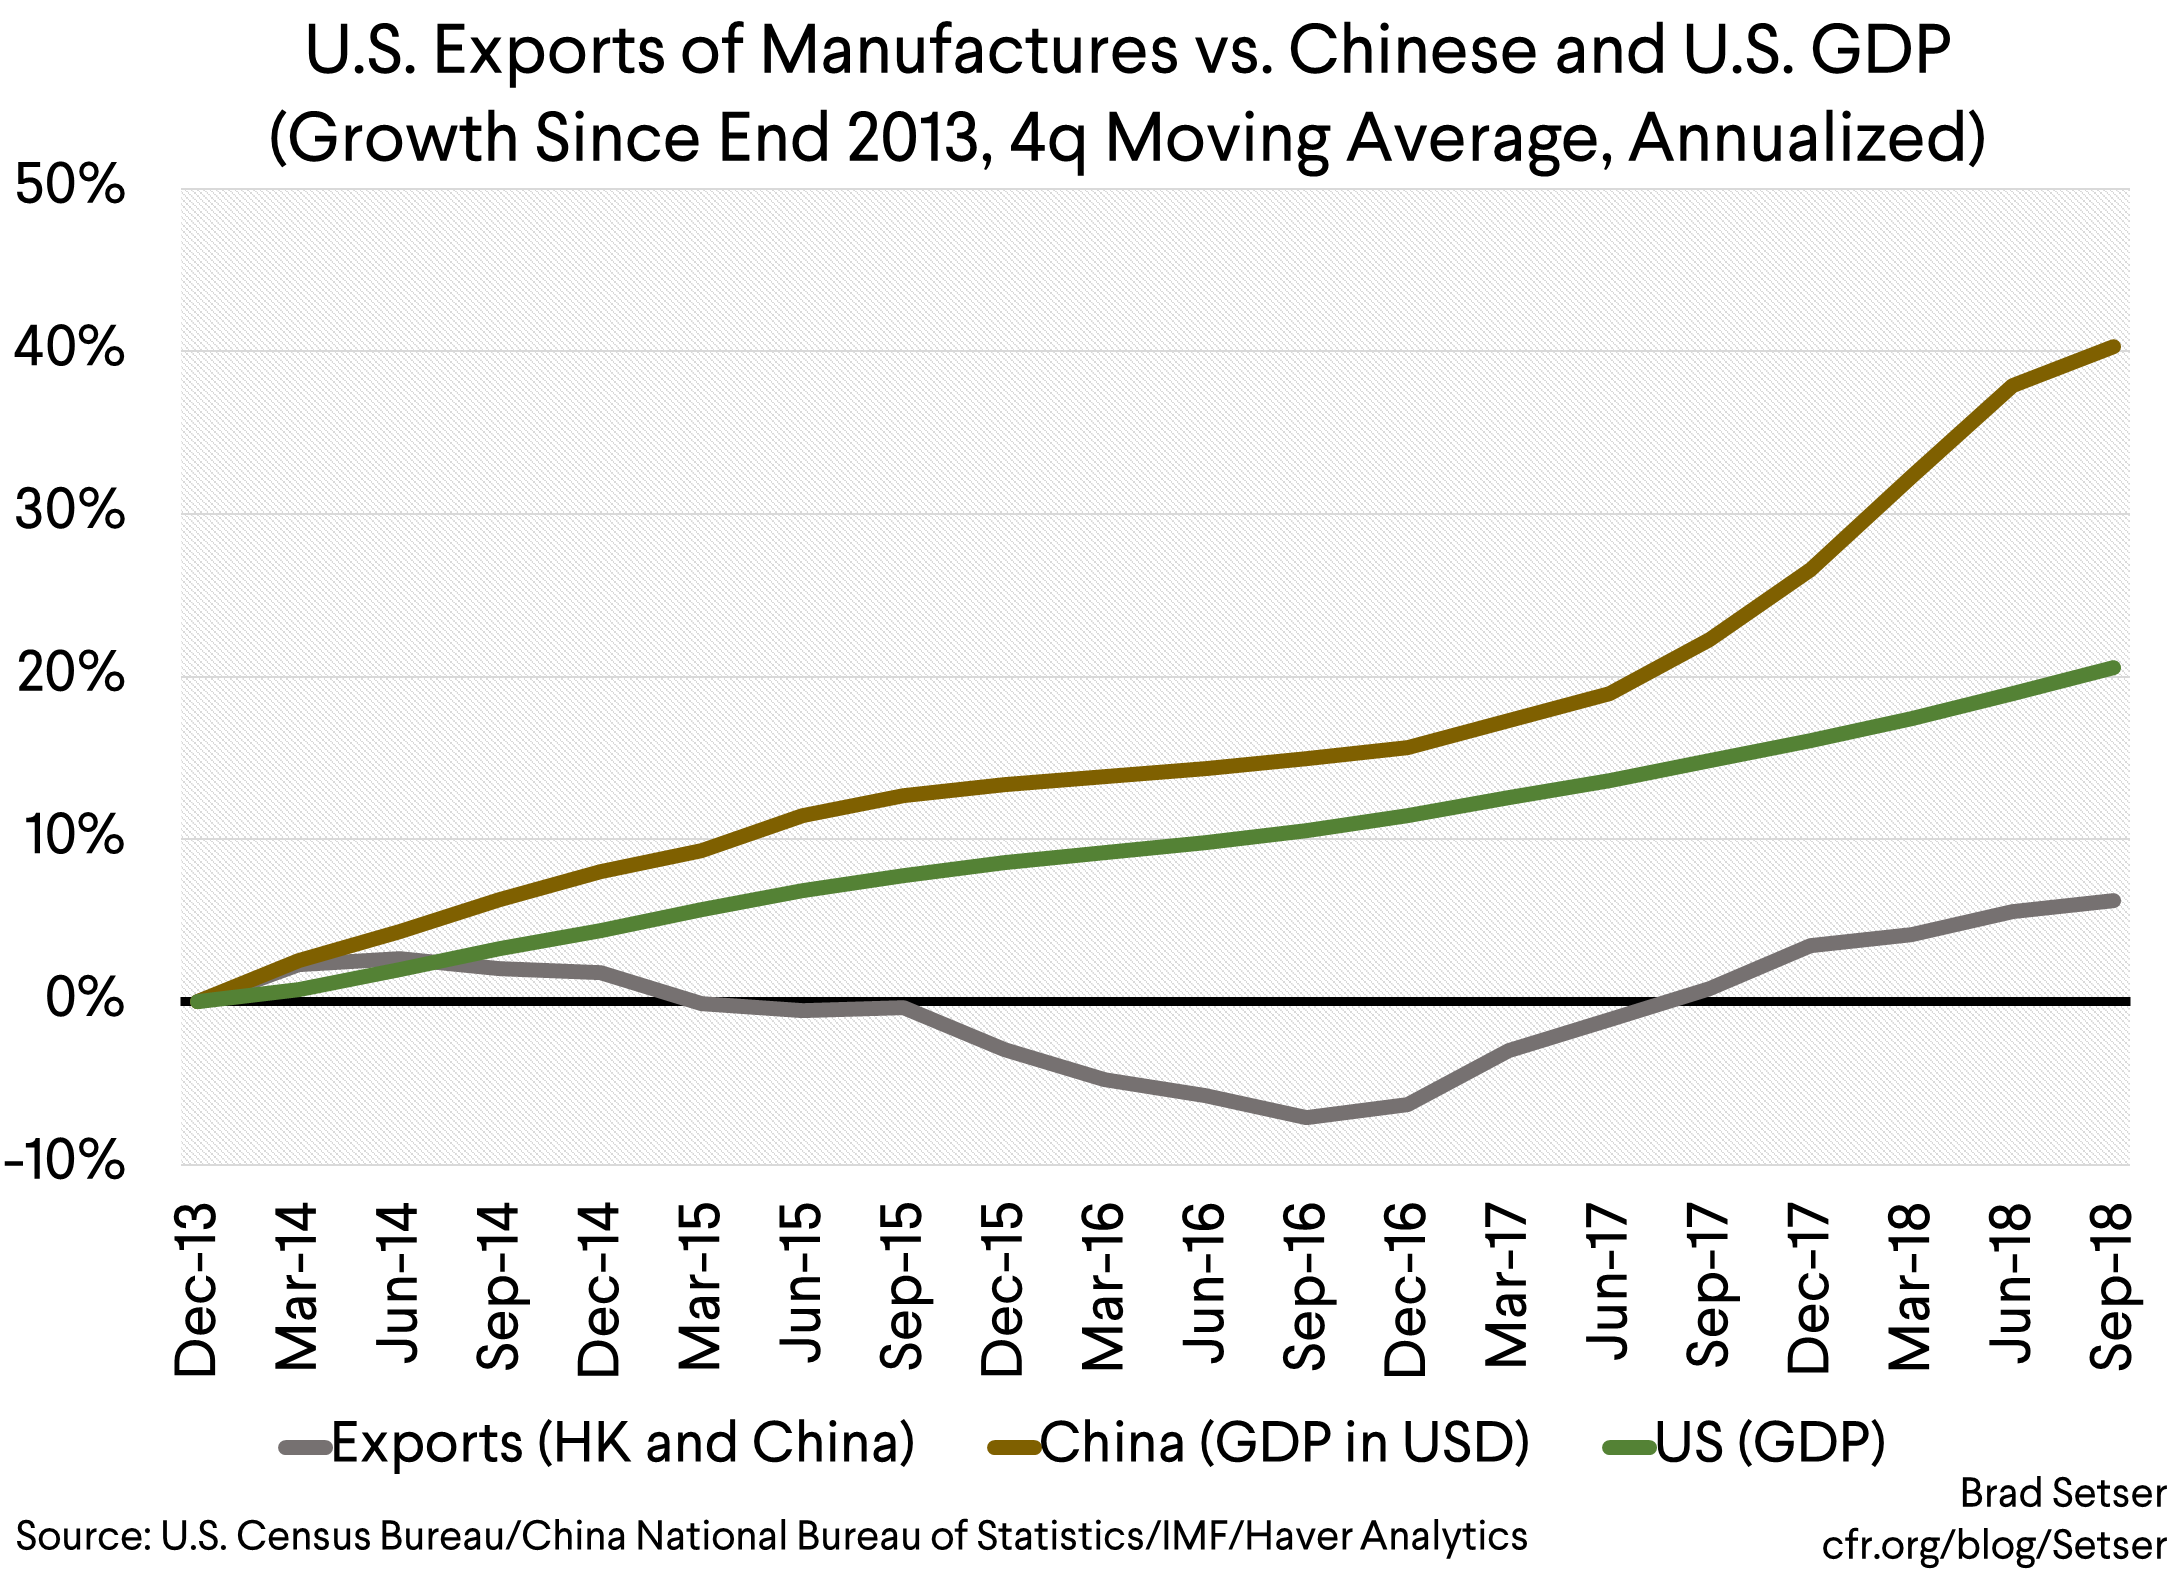 Why Haven't U.S. Exports of Manufactures Kept Pace with China's Growth?